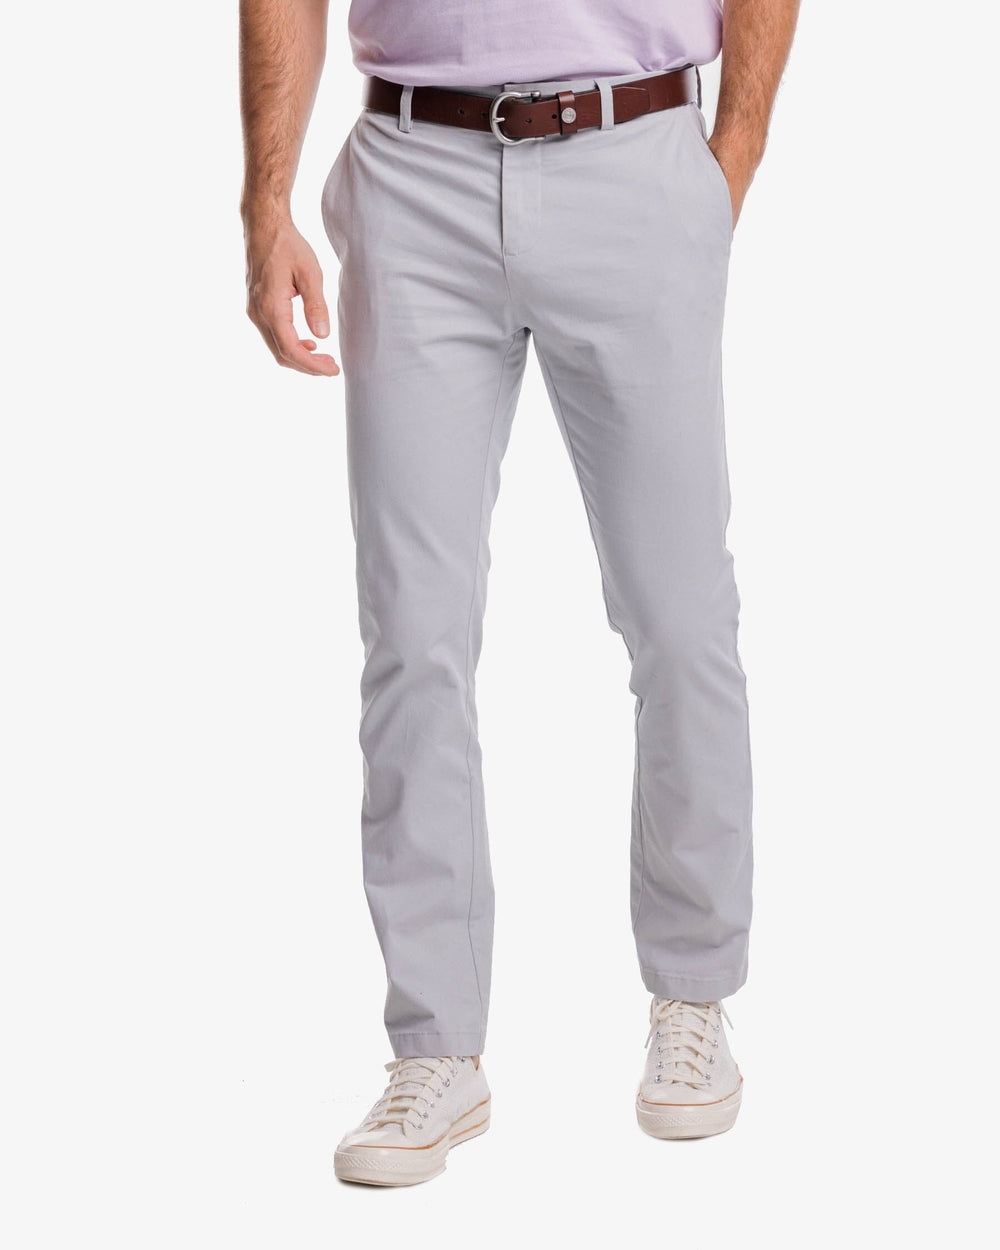 The front view of the Southern Tide Channel Marker Chino Pant by Southern Tide - Seagull Grey